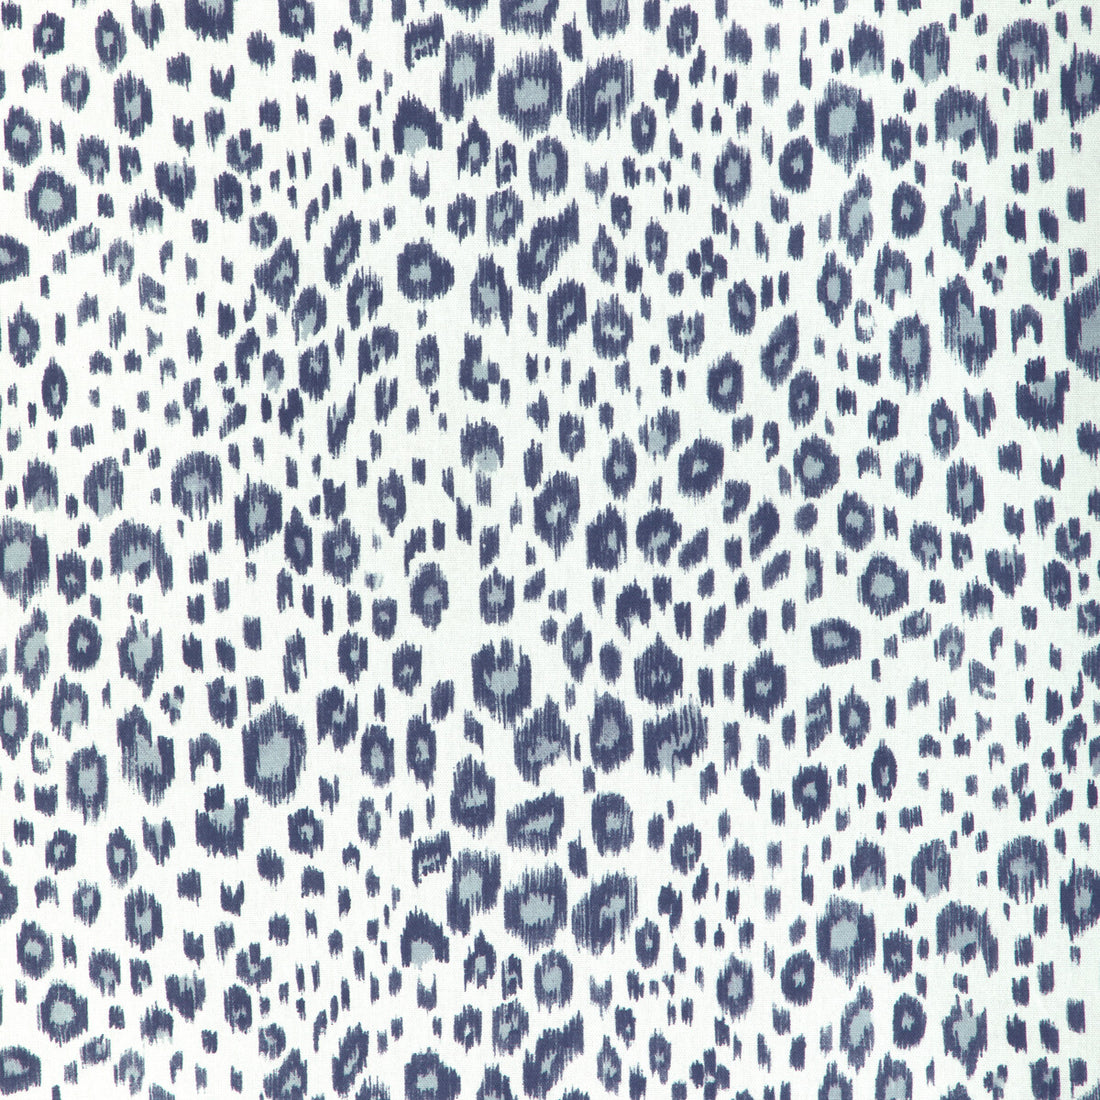 Leopardos fabric in lapis color - pattern LEOPARDOS.155.0 - by Kravet Basics in the Small Scale Prints collection